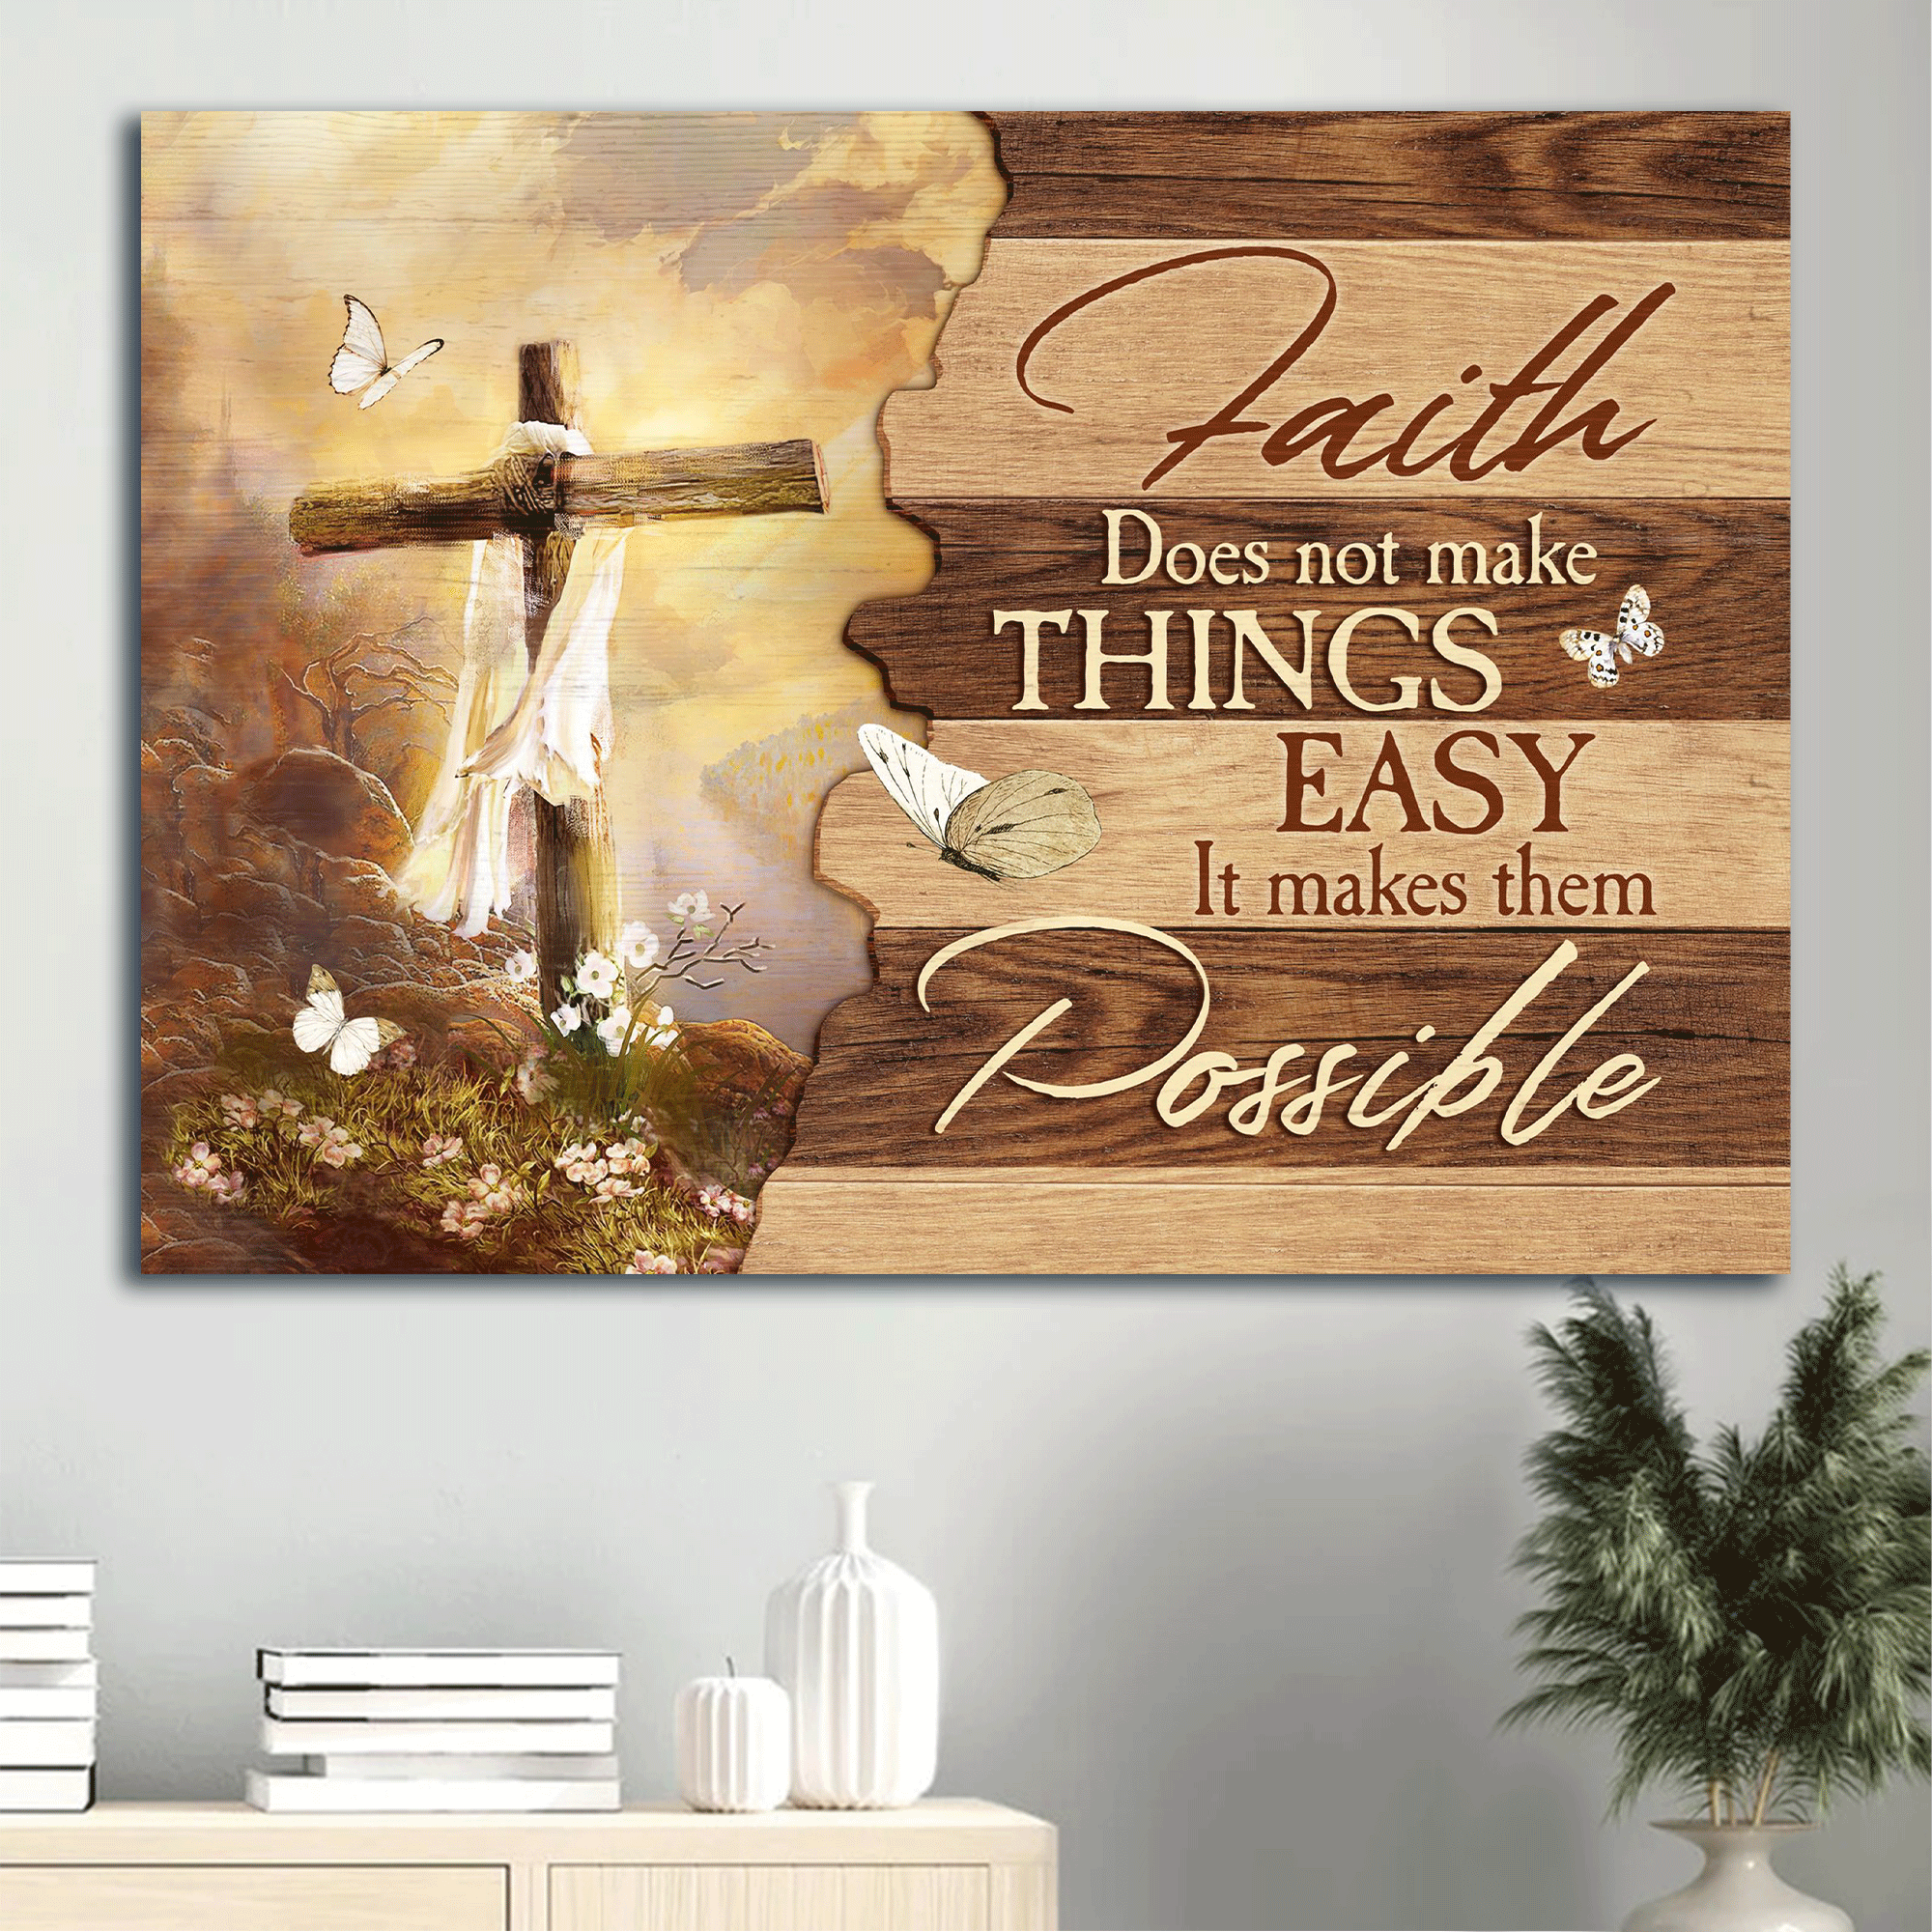 Eyekons Church Images | CD Collections of Christian Art, Religious Images &  Biblical Illustrations